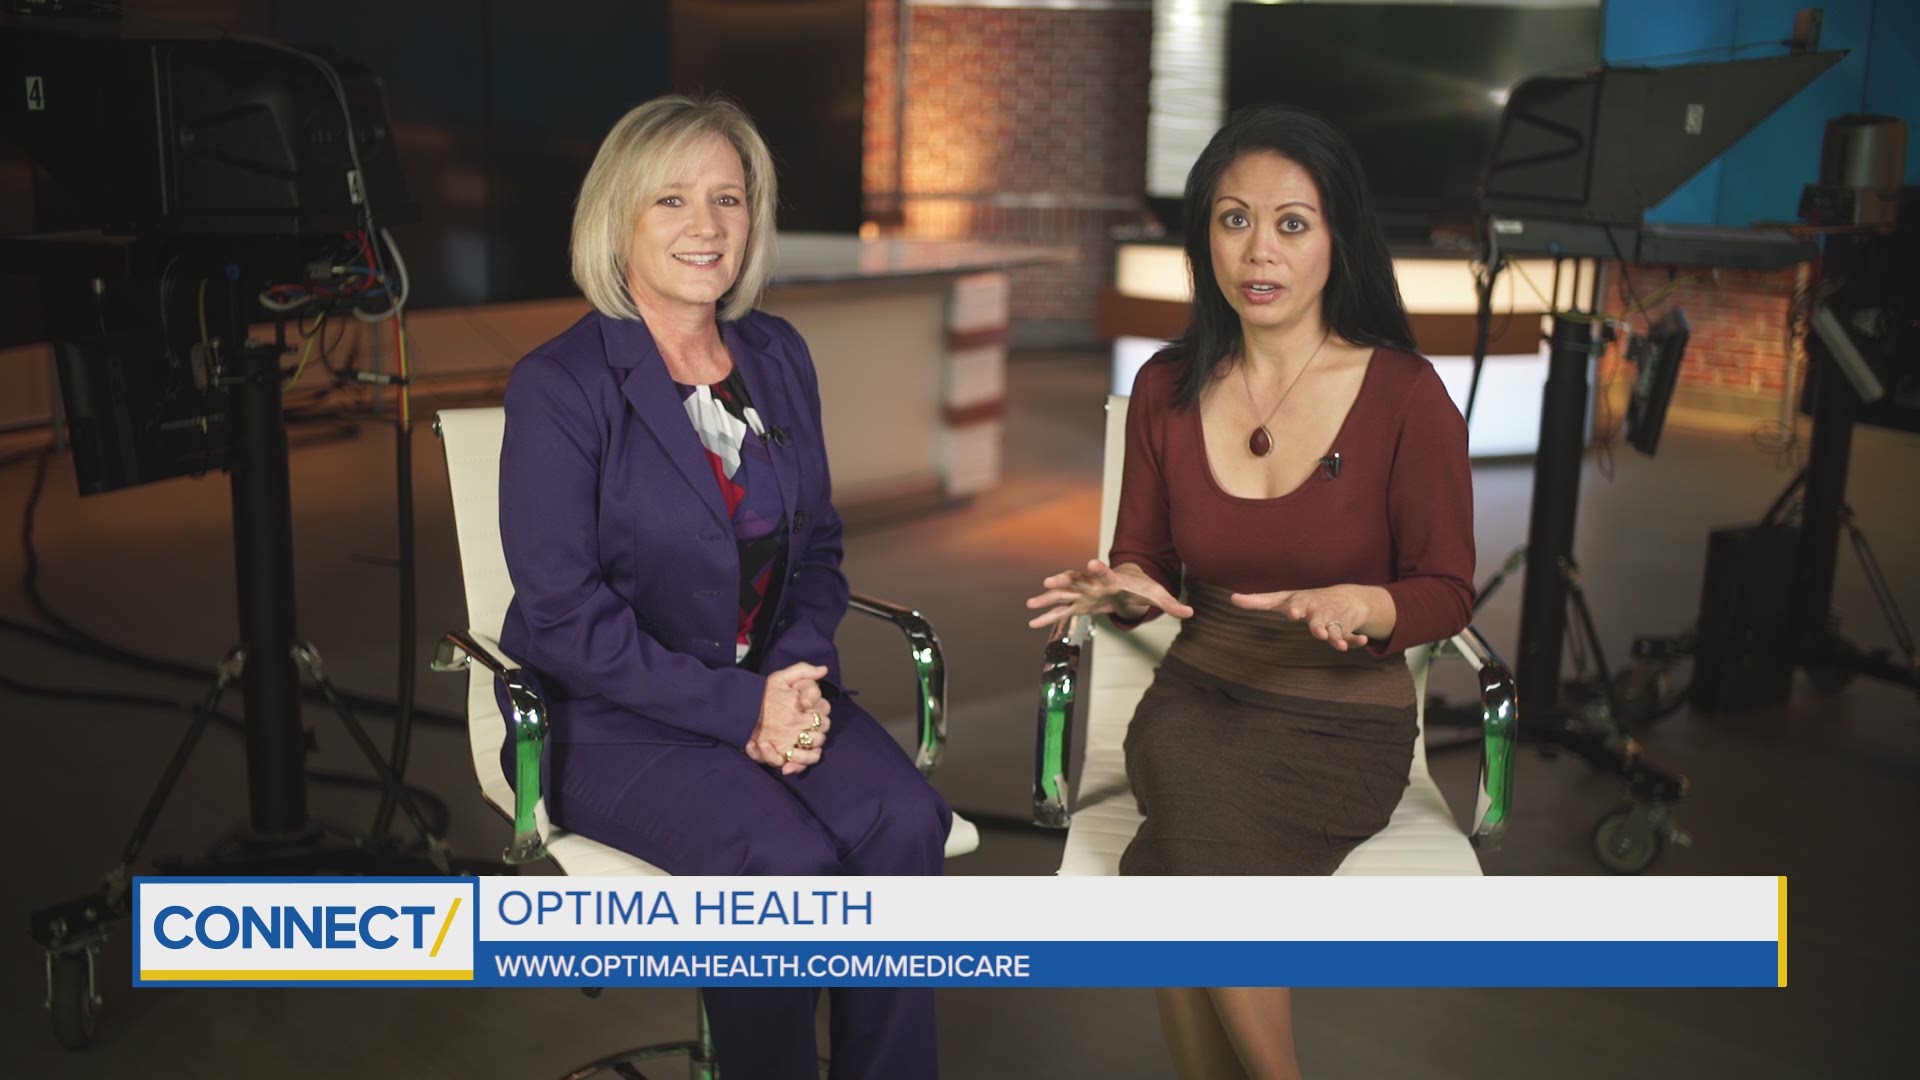 Annual Enrollment for Medicare ends on December 7th.  Optima Health wants to help you navigate the process as you review your options and make changes for the upcoming year.